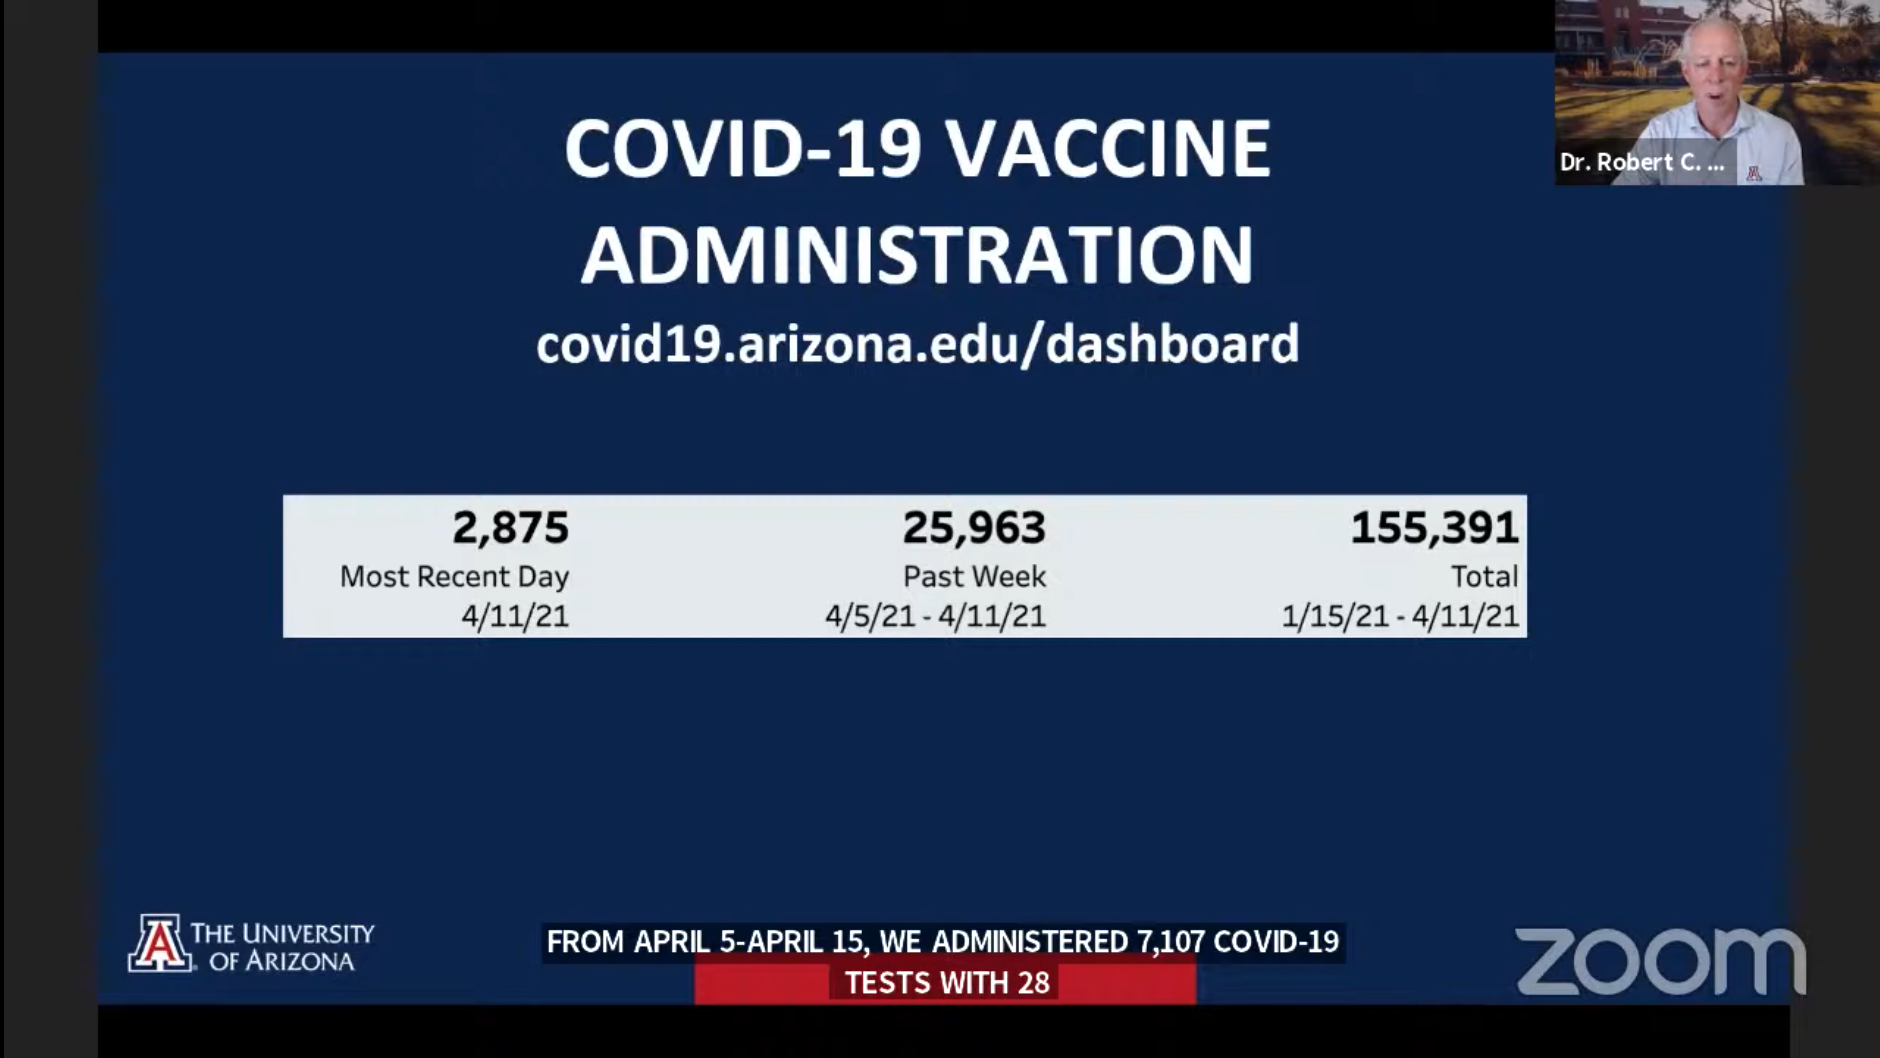 Screenshot of recent COVID-19 vaccine administration data; over 25,000 people received a vaccine from April 5-11. 